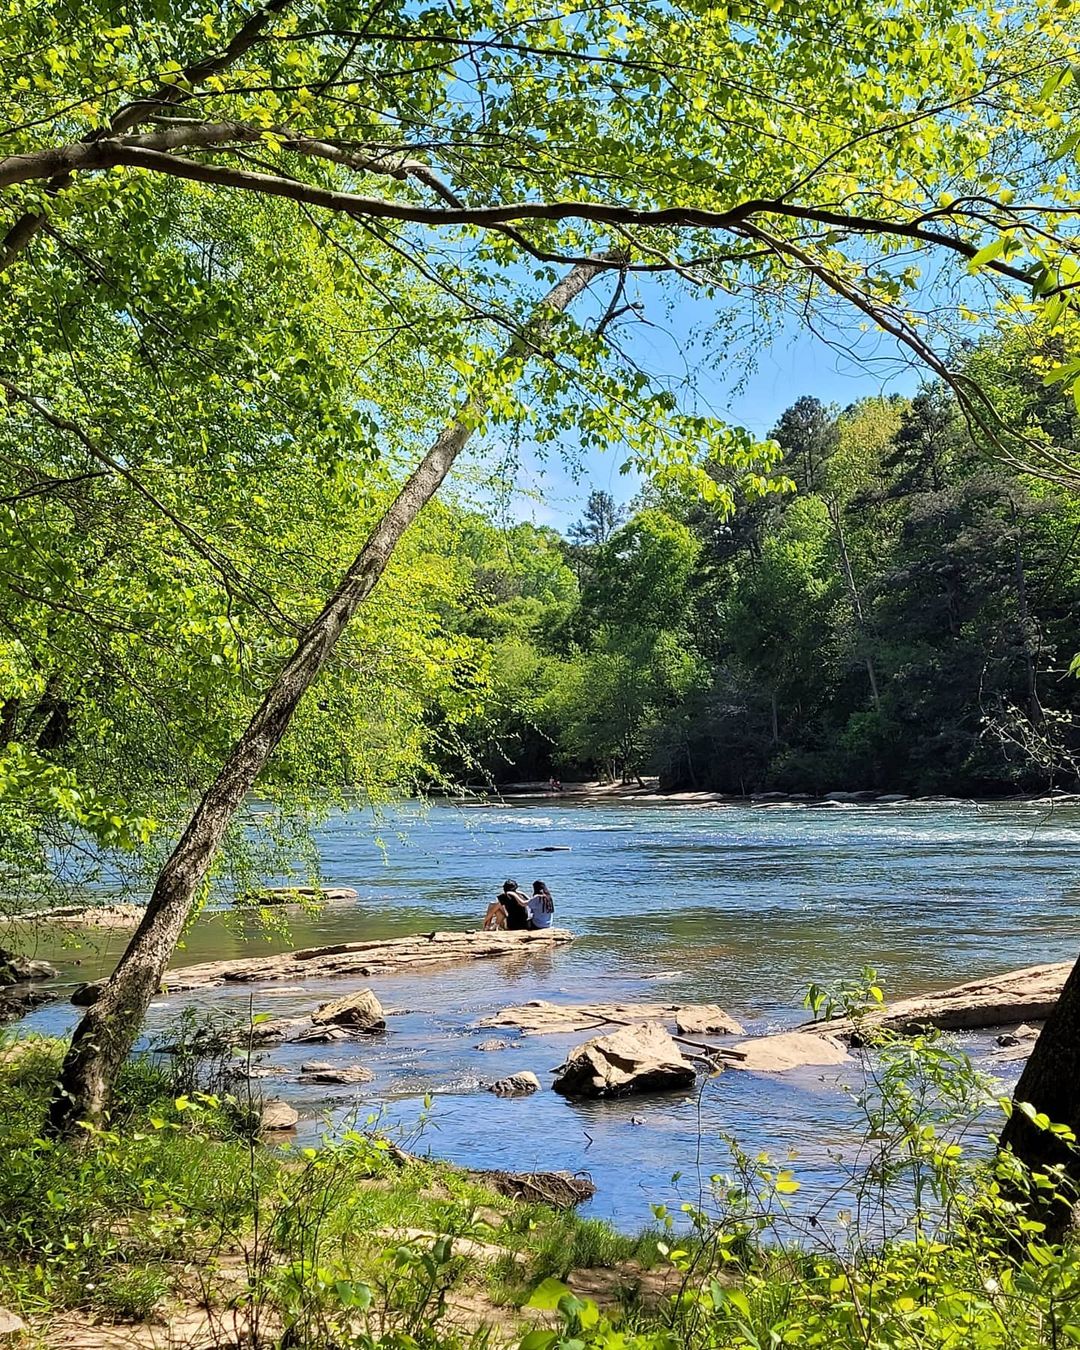 Daytime photo on the Chattahoochee River. Photo by Instagram user @vanessaberry.realtor